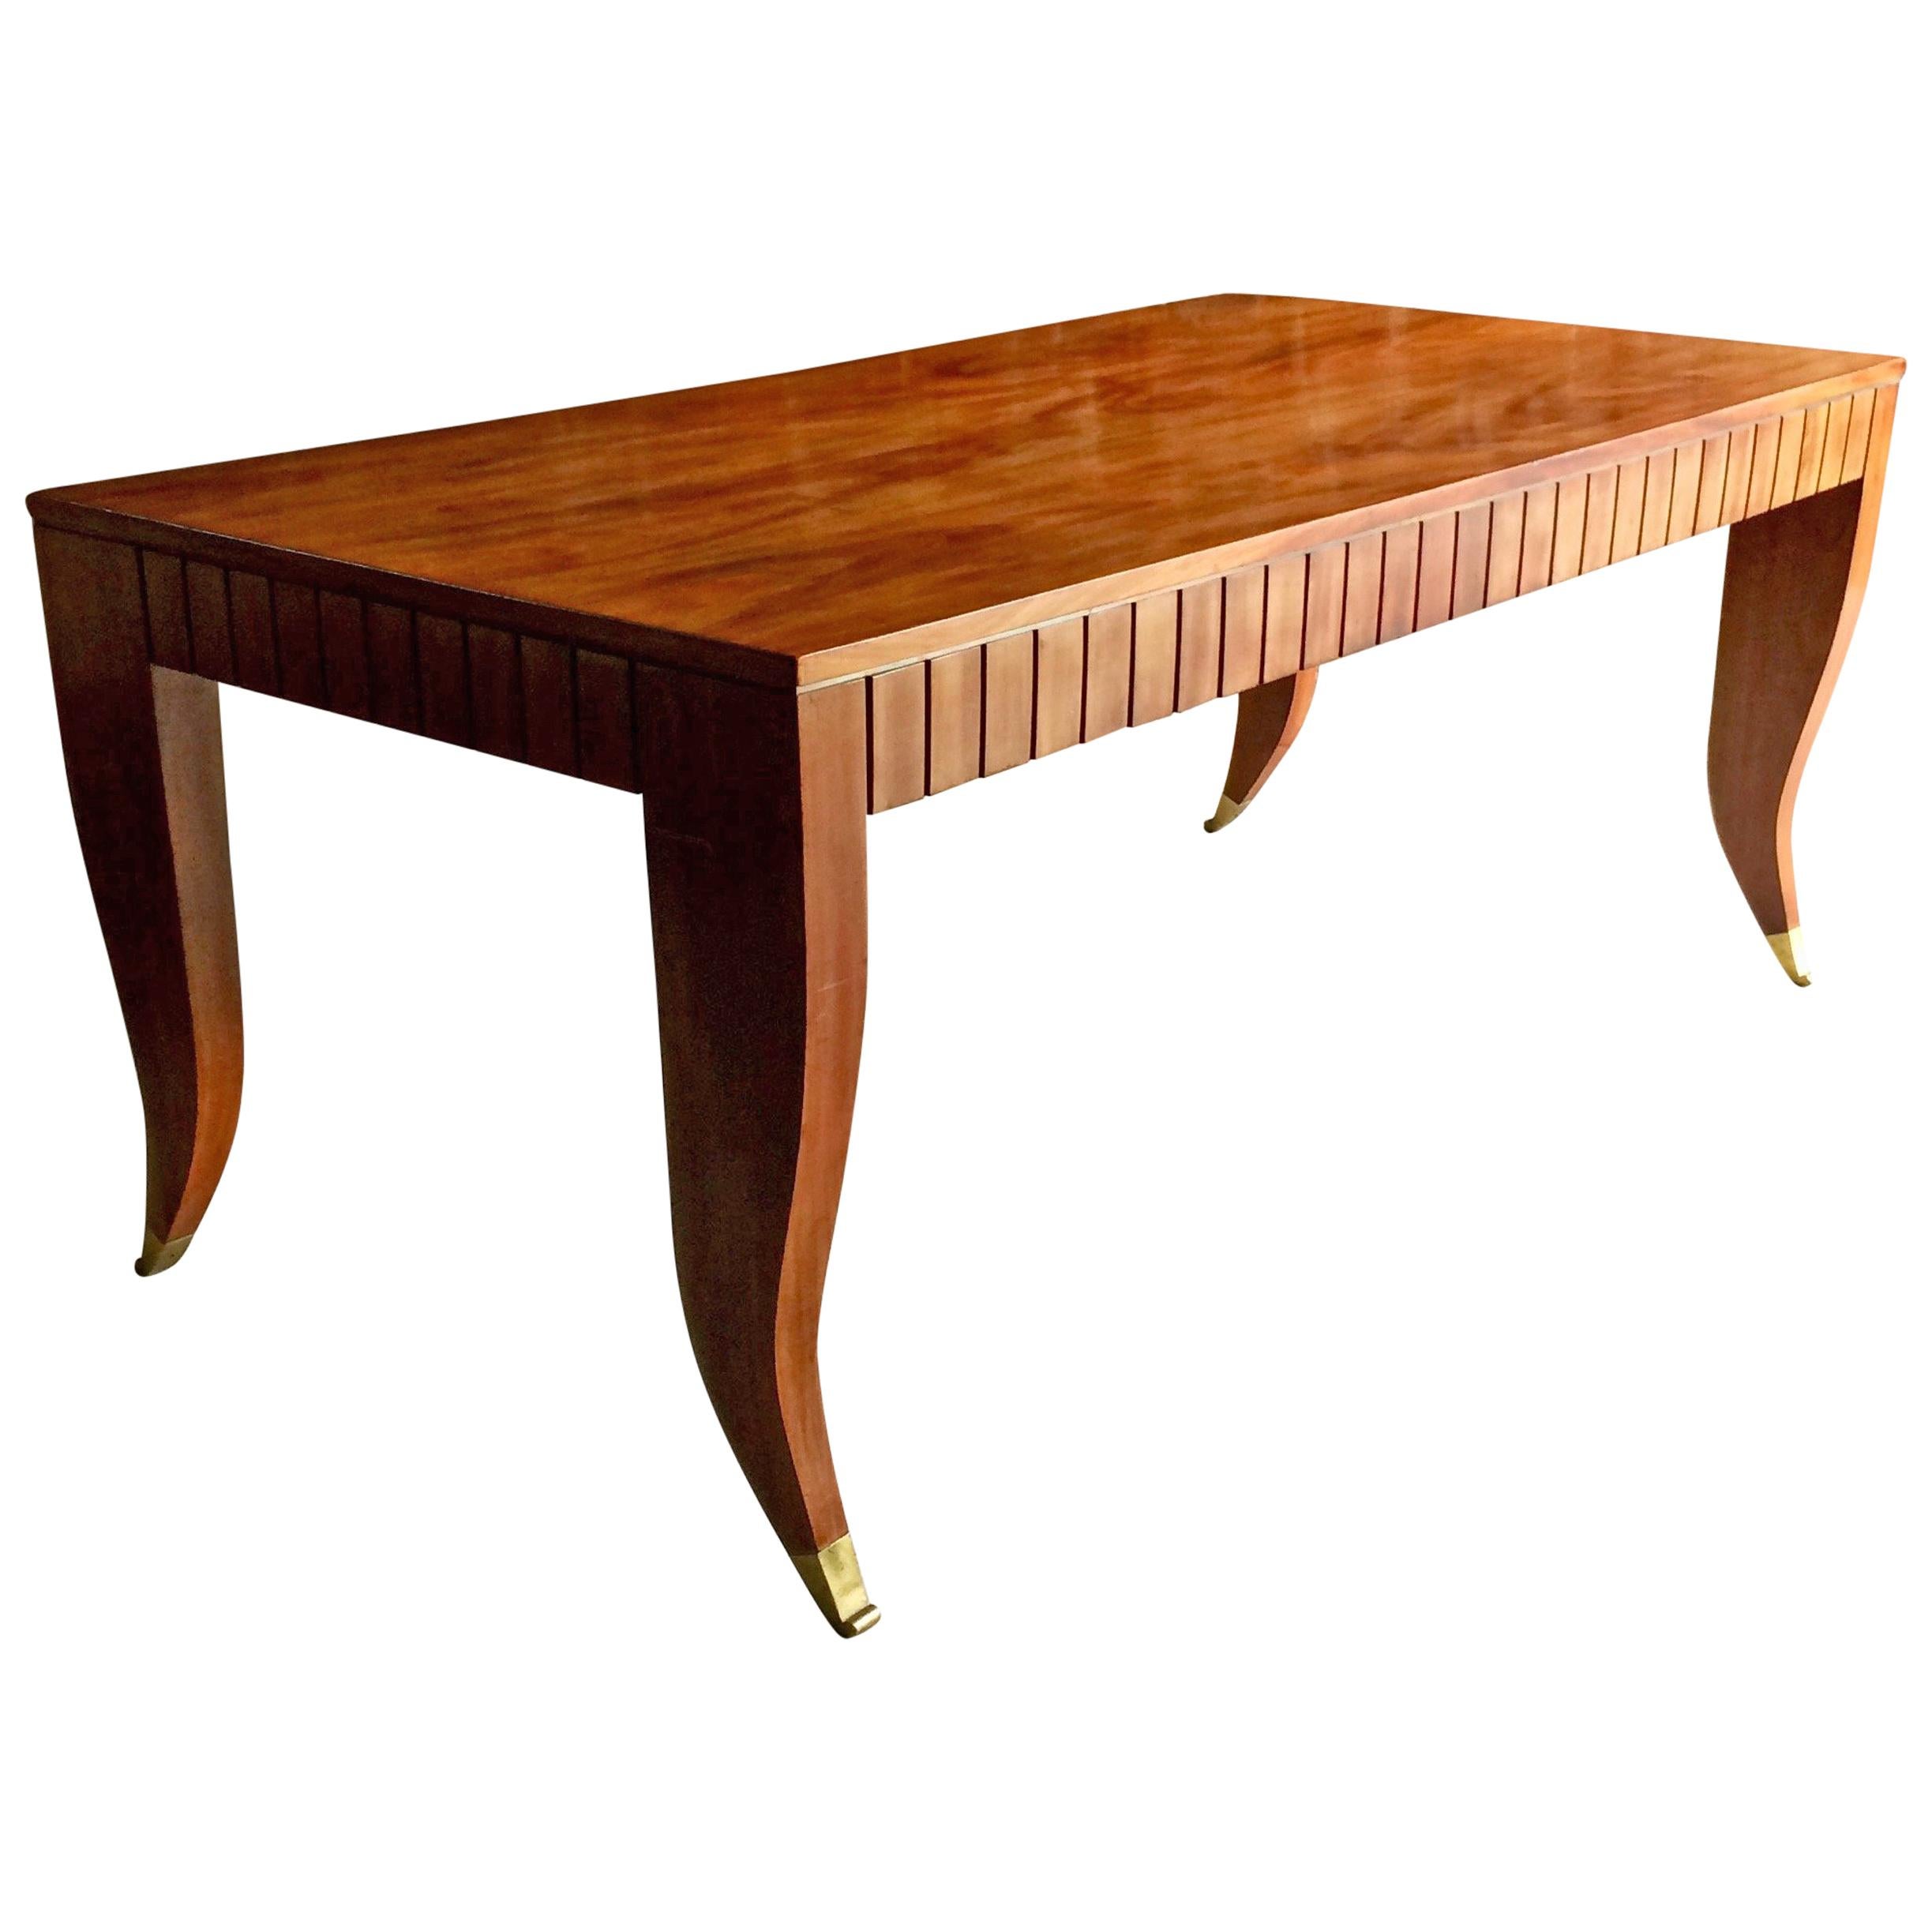 Extremely rare midcentury Gio Ponti (attirubuted to by Sotheby's) flamed mahogany dining table or desk circa 1940, the rectangular flamed mahogany top with fluted frieze raised on shaped legs with gilt bronze sabots.

Provenance: lot 148, Gordon